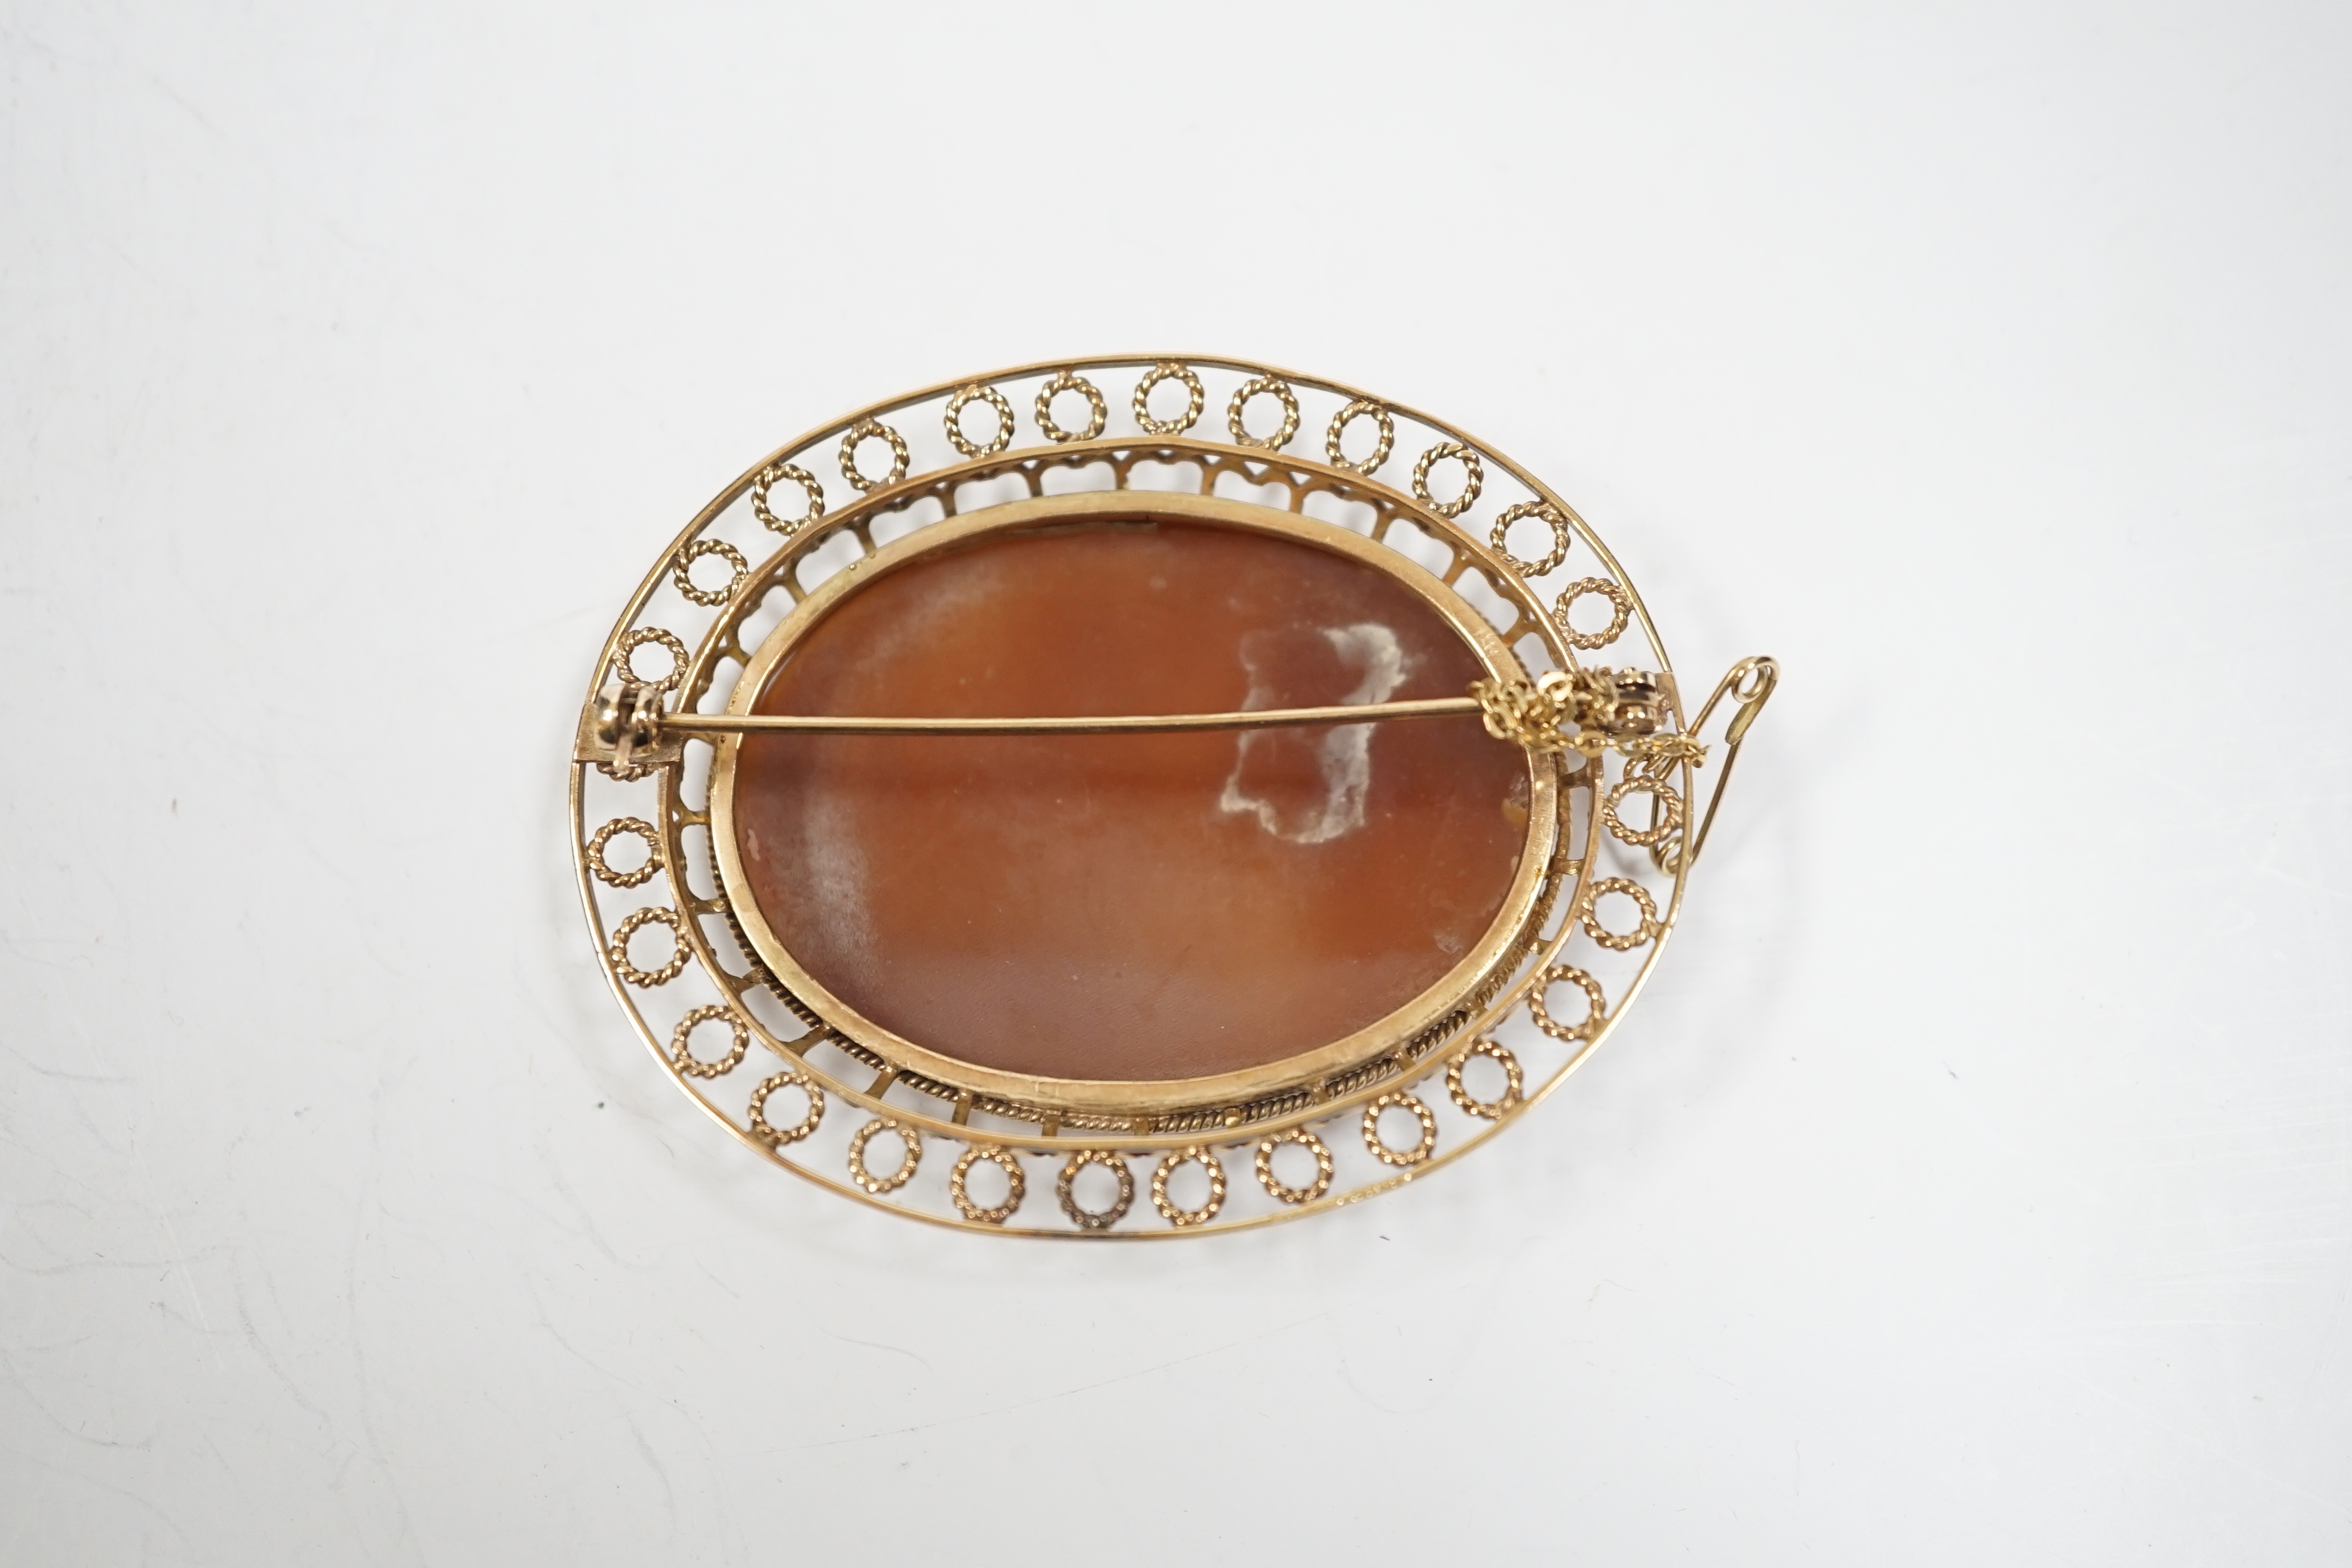 A yellow metal mounted oval cameo shell brooch, carved with two seated ladies with sheep, beneath - Image 2 of 2